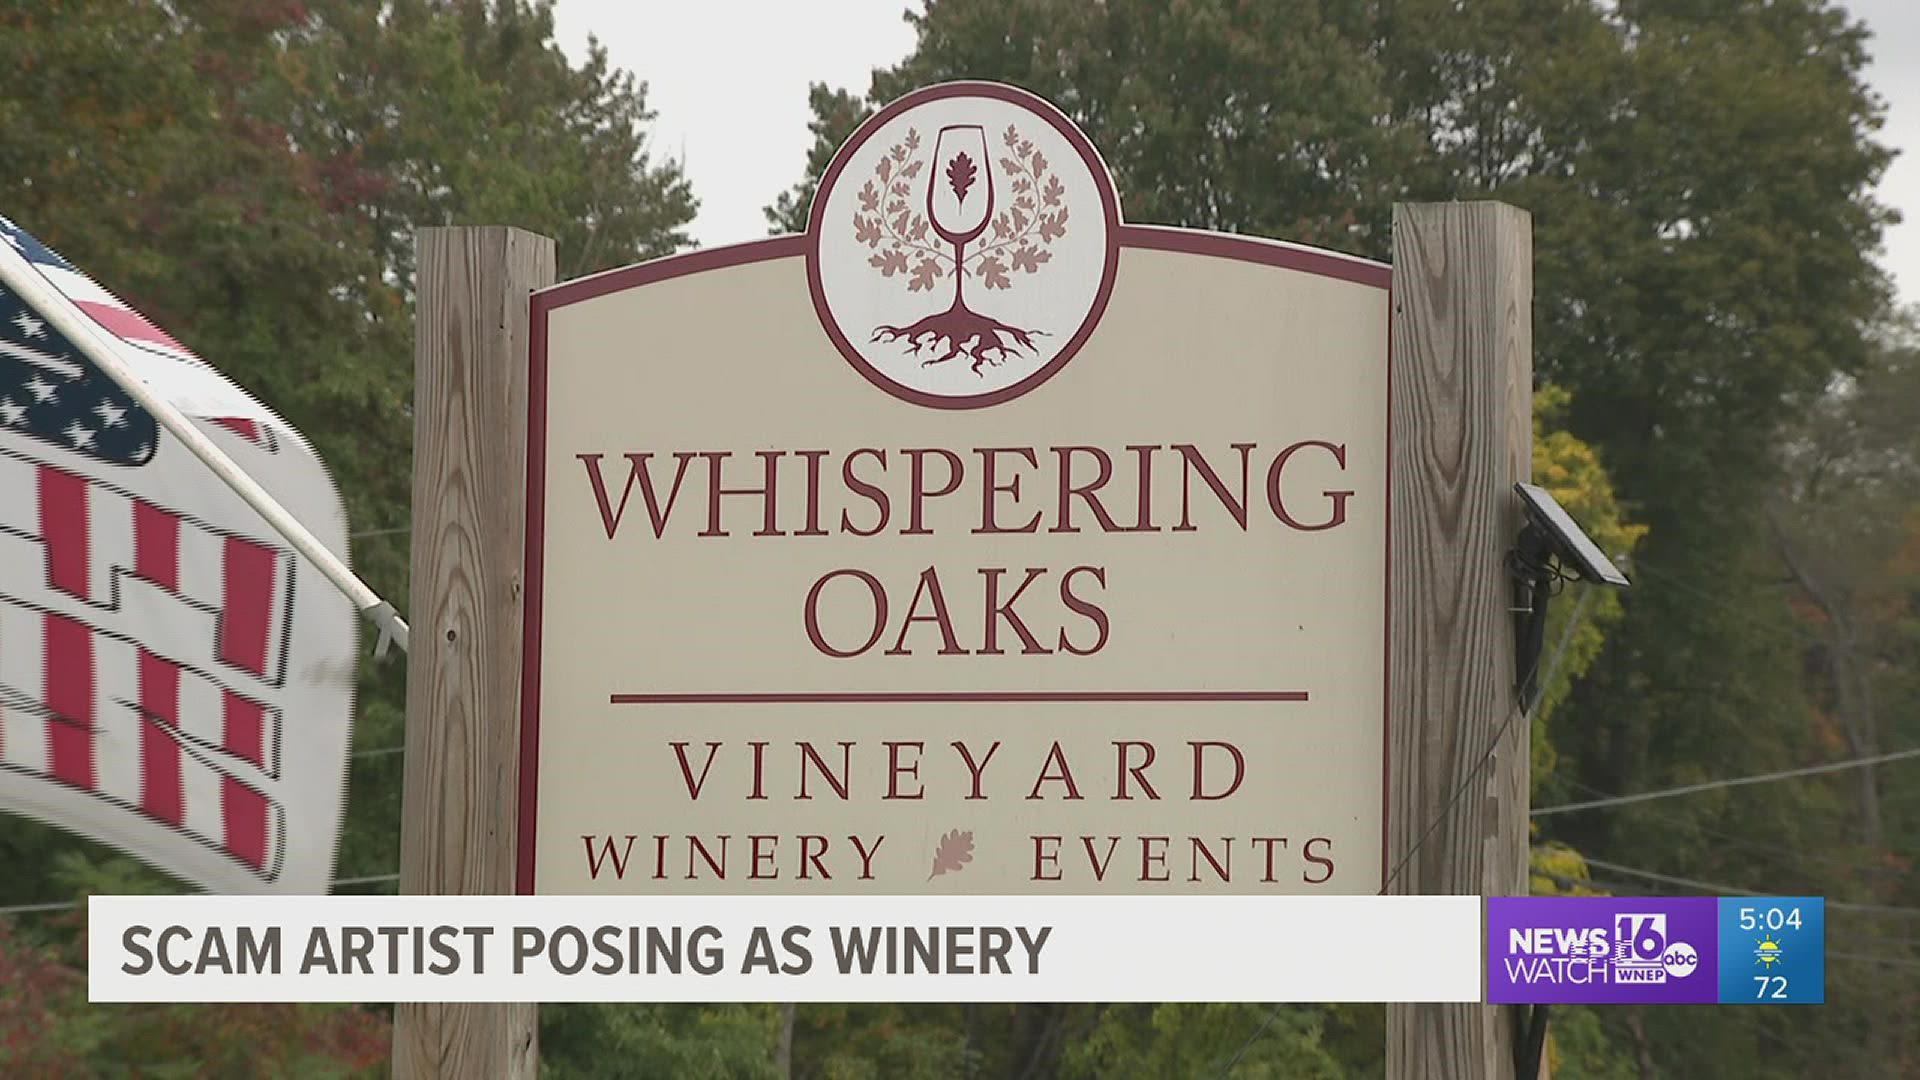 The owners of a winery in Northumberland County are warning their customers about a scam and they want to make sure others do not fall for it.